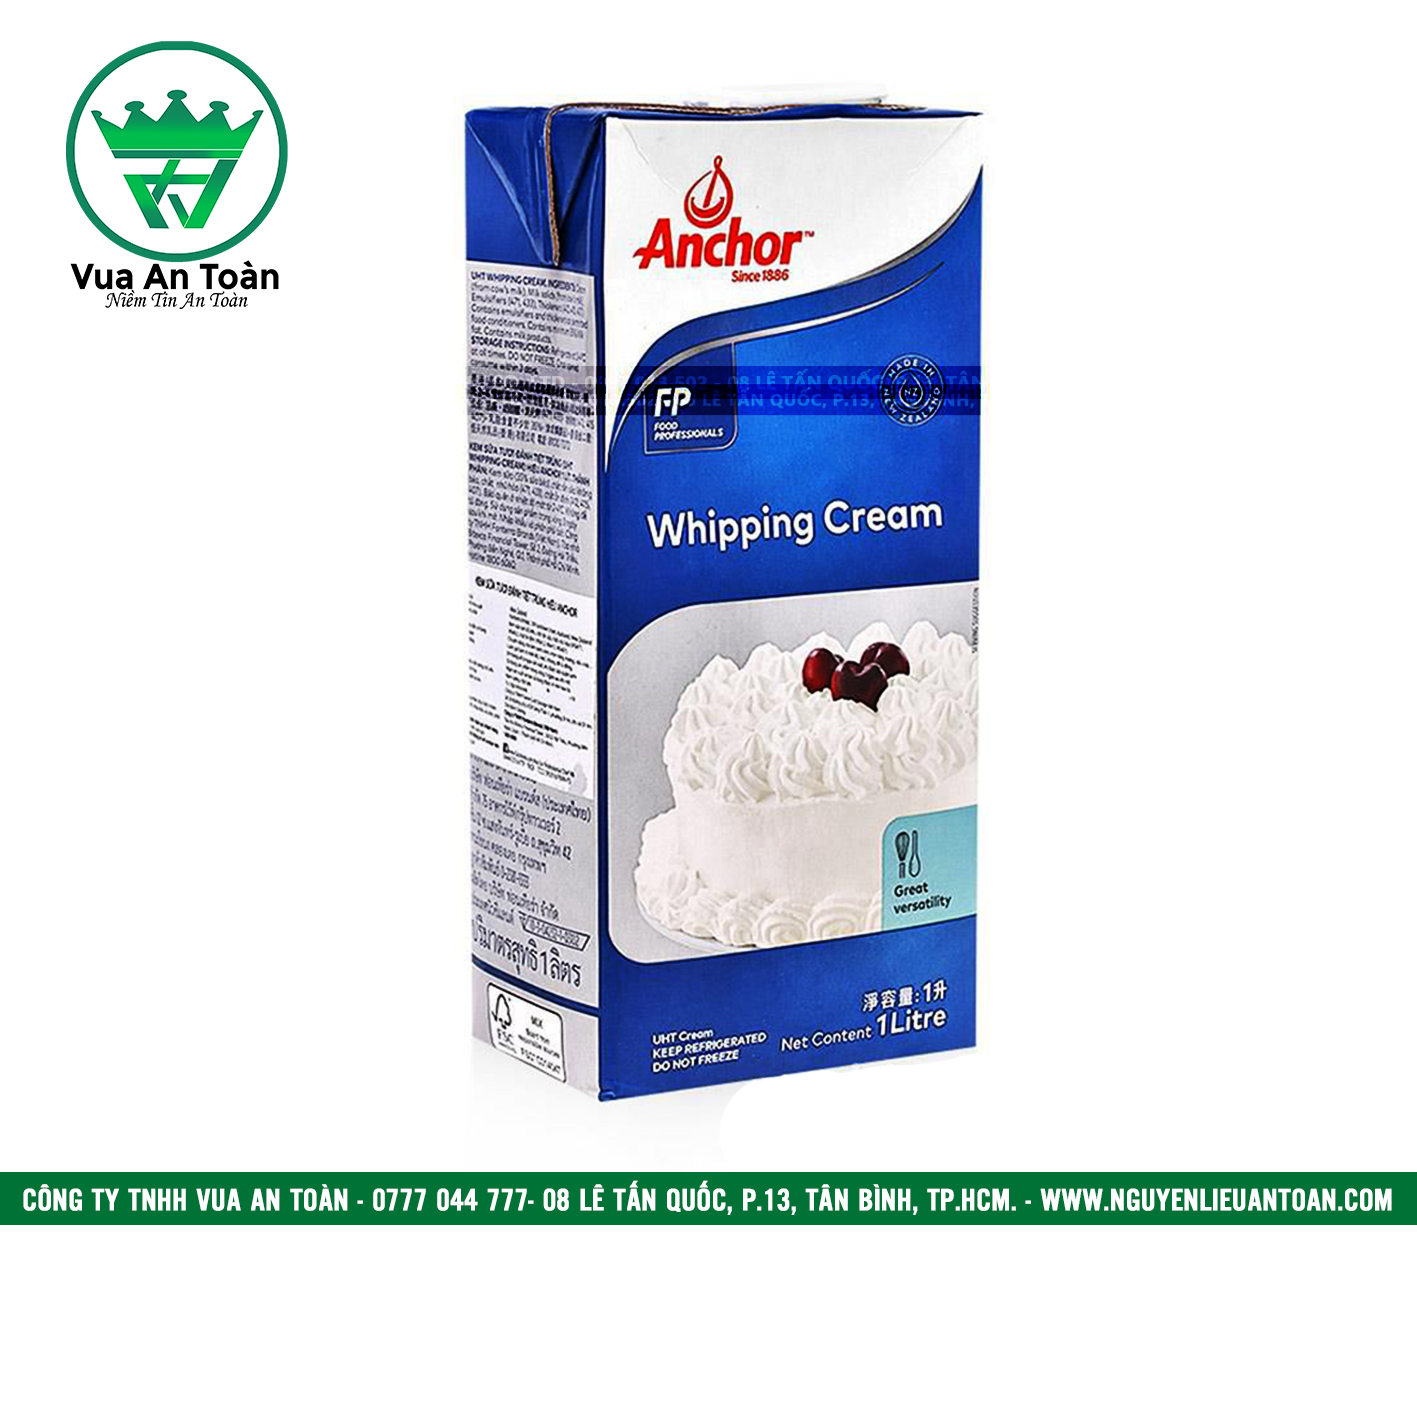 WHIPPING CREAM ANCHOR 1L